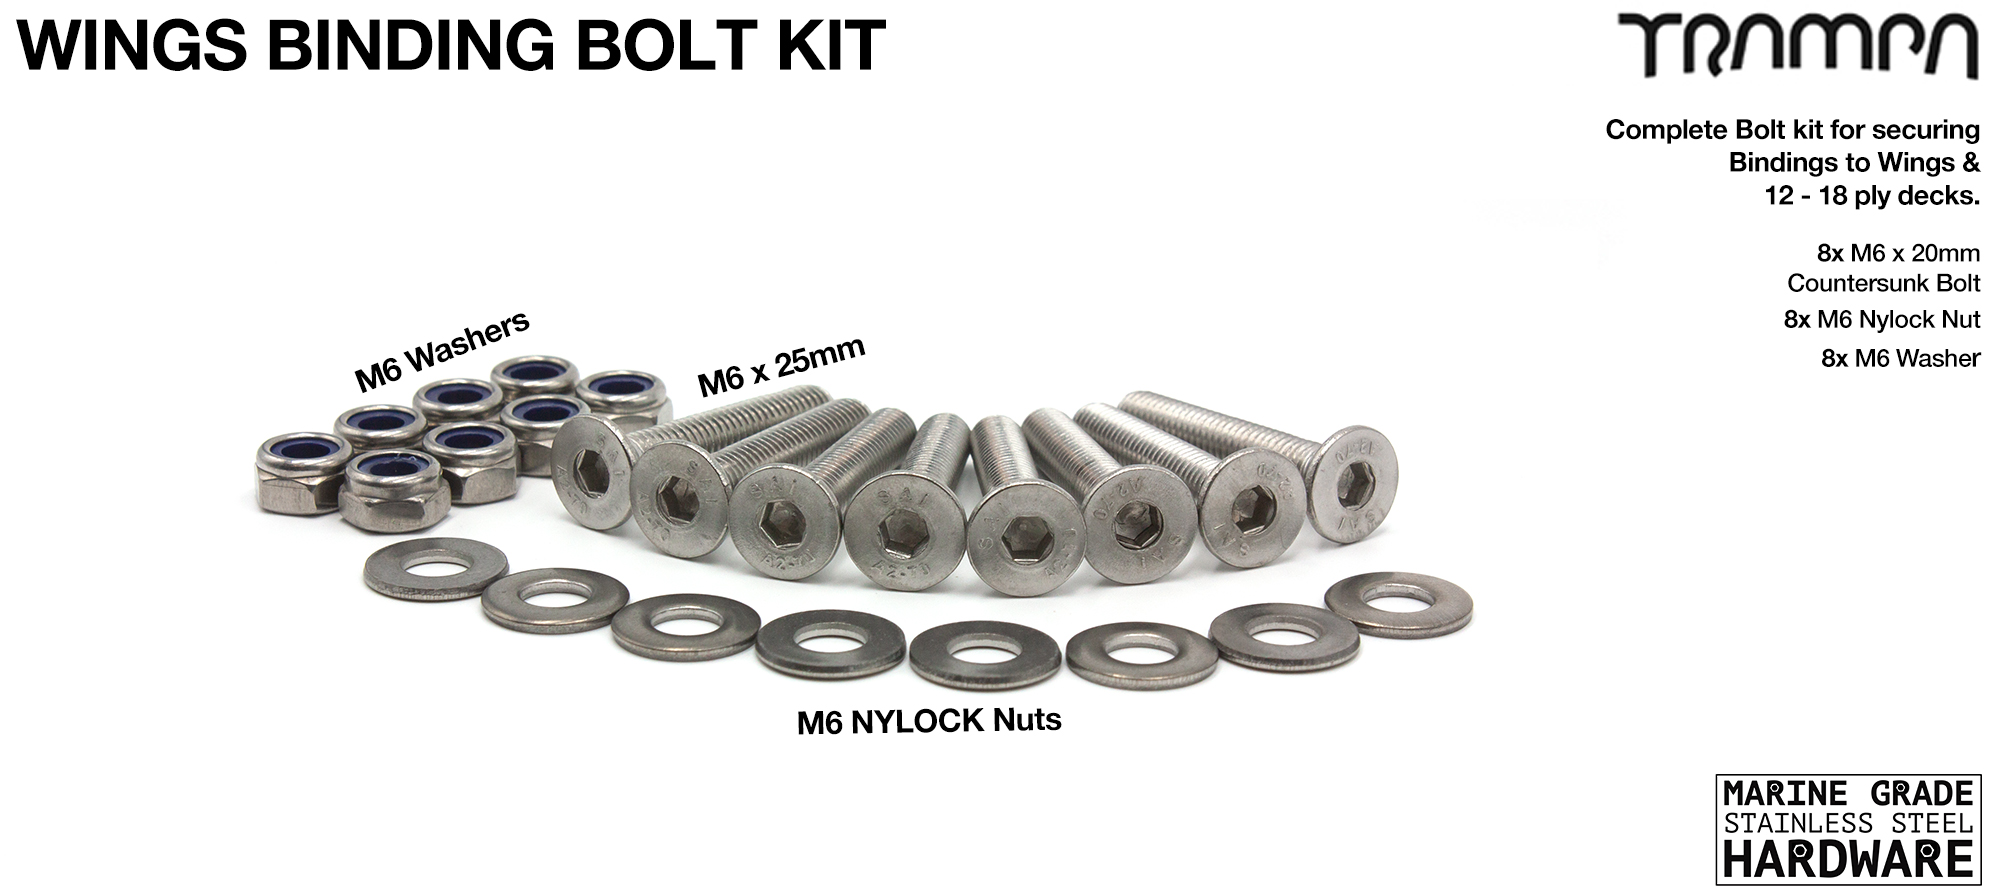 Bindings Bolt Kit M6x35 Countersunk Bolt Kit 16/17ply to fit Bindings to the deck when using WINGS M6 Marine Grade Stainless Steel Countersunk Binding Bolt Kit